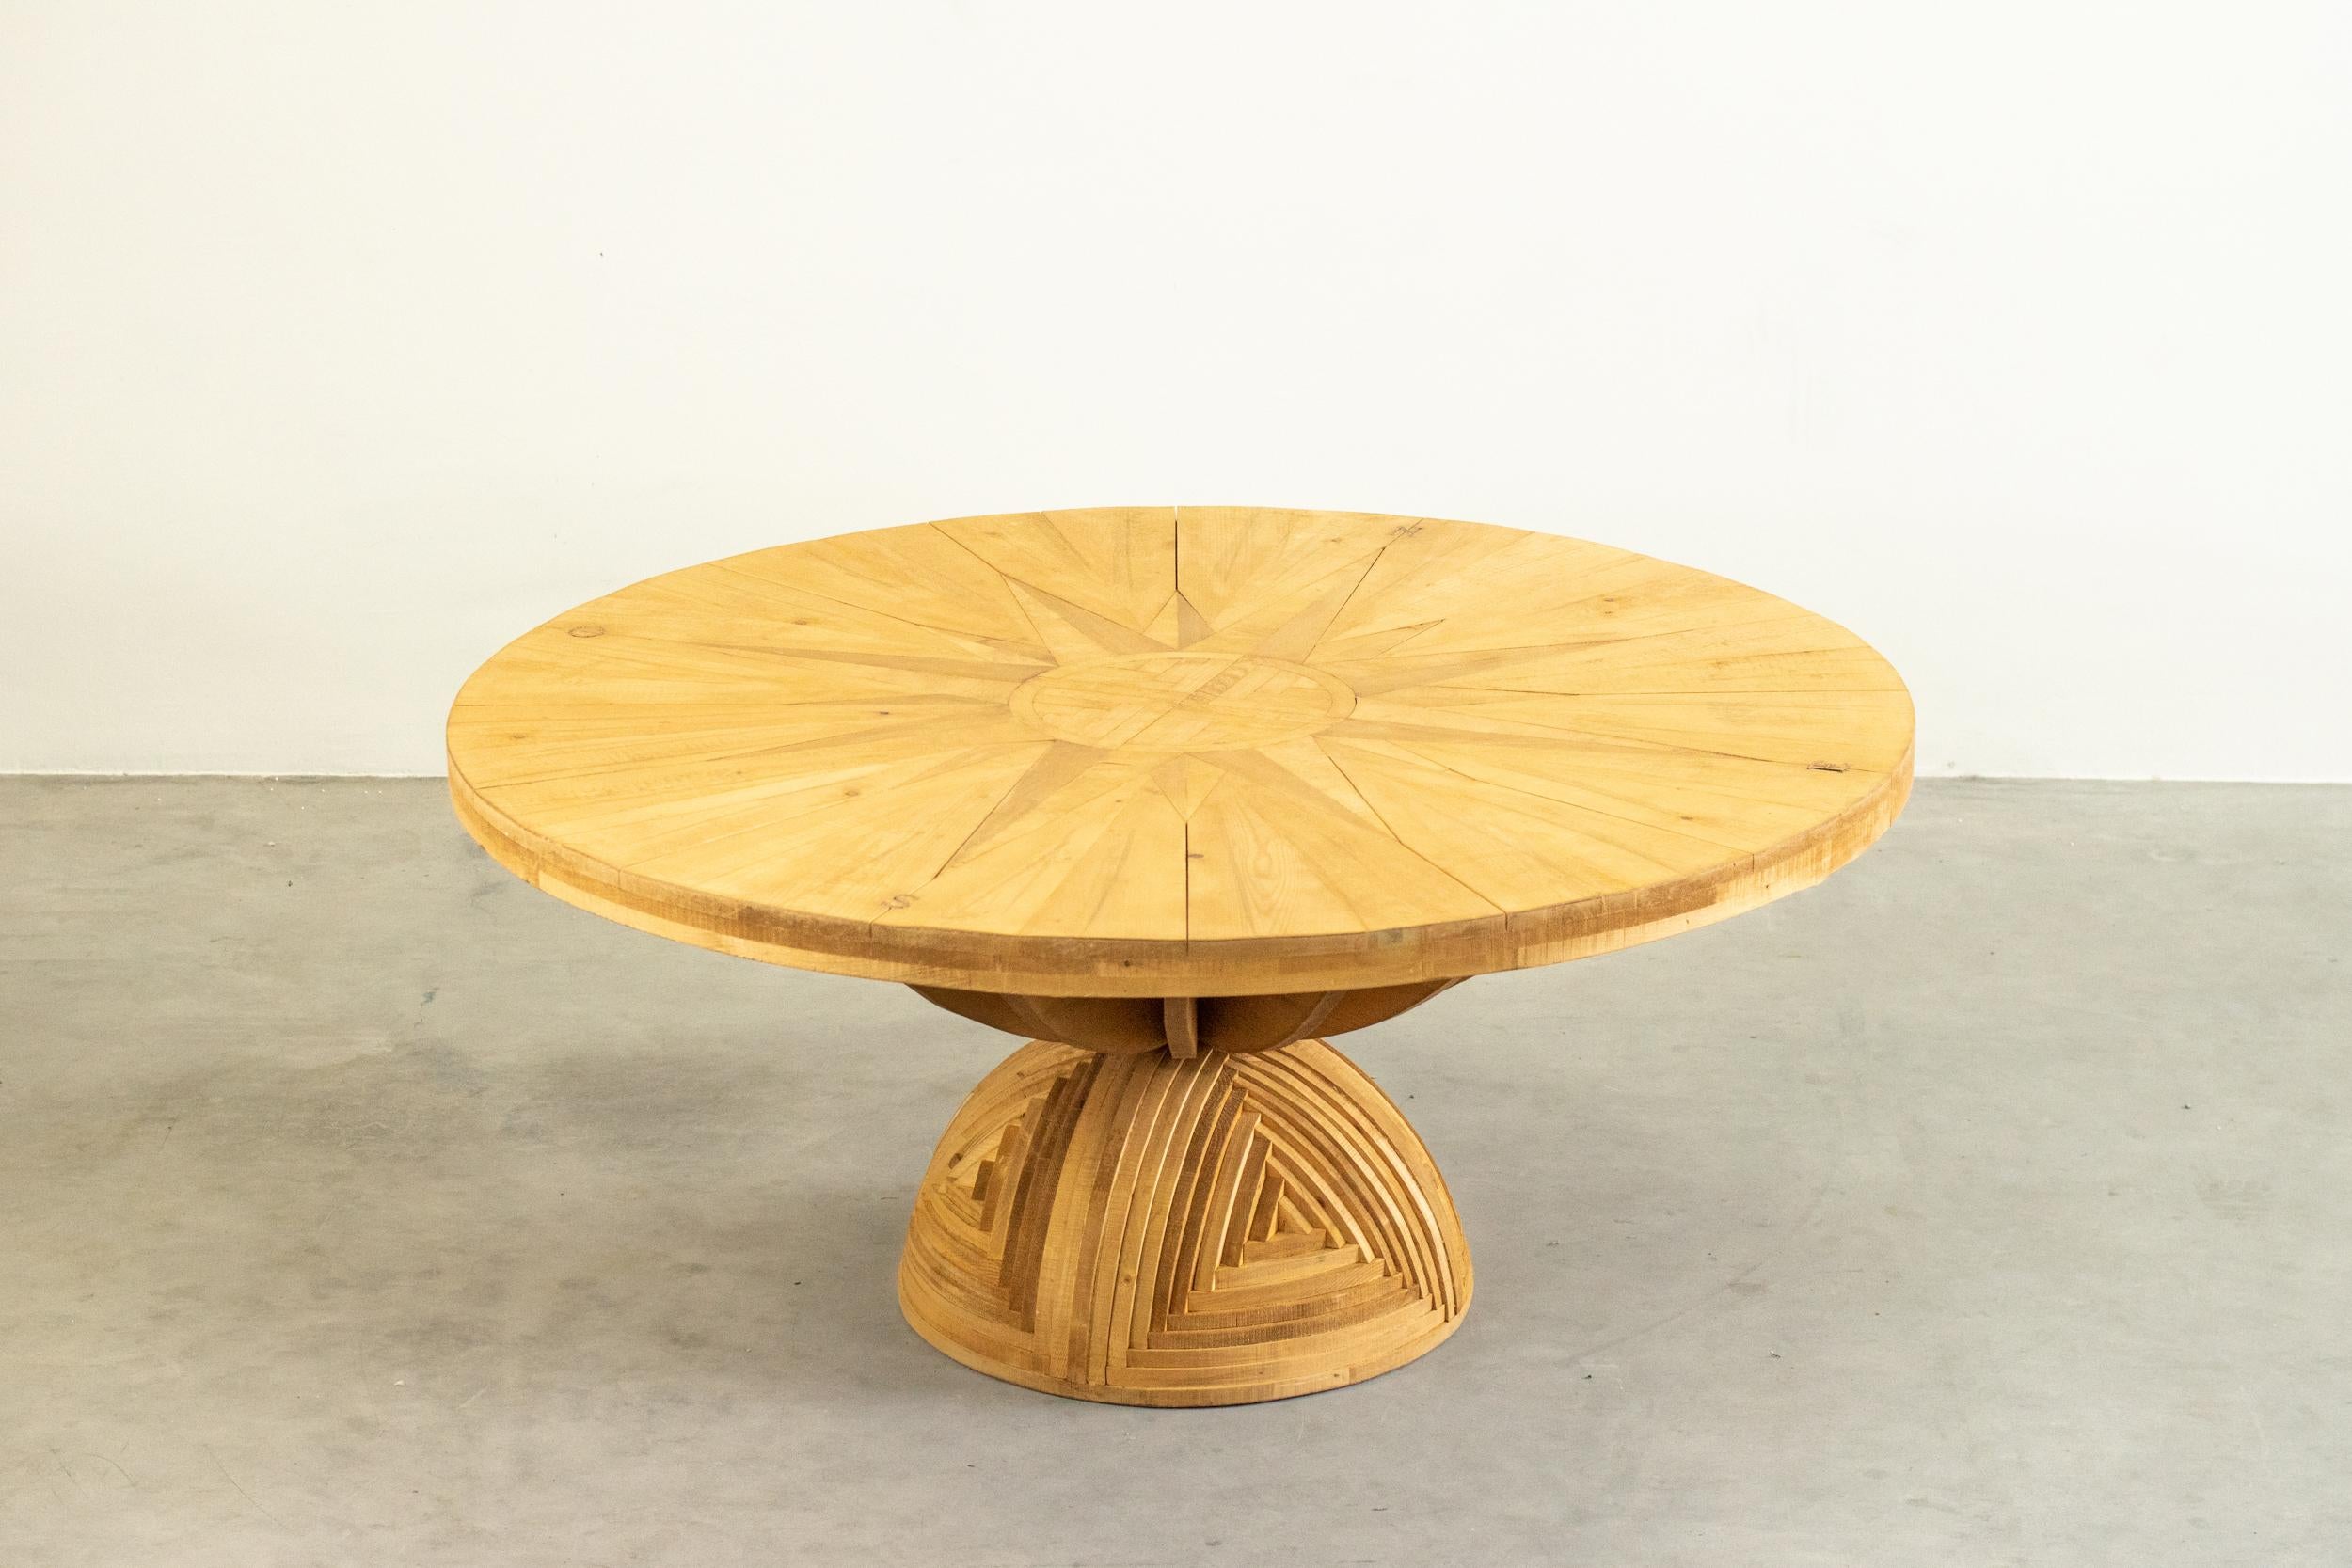 A beautiful and pristine large size round table by Ceroli La Rosa dei Venti in pinewood, with inlays.
Designed by Mario Ceroli and manufactured by Poltronova, Italy, 1973.
Manufacturer's brand marked with fire on the table structure.
It can